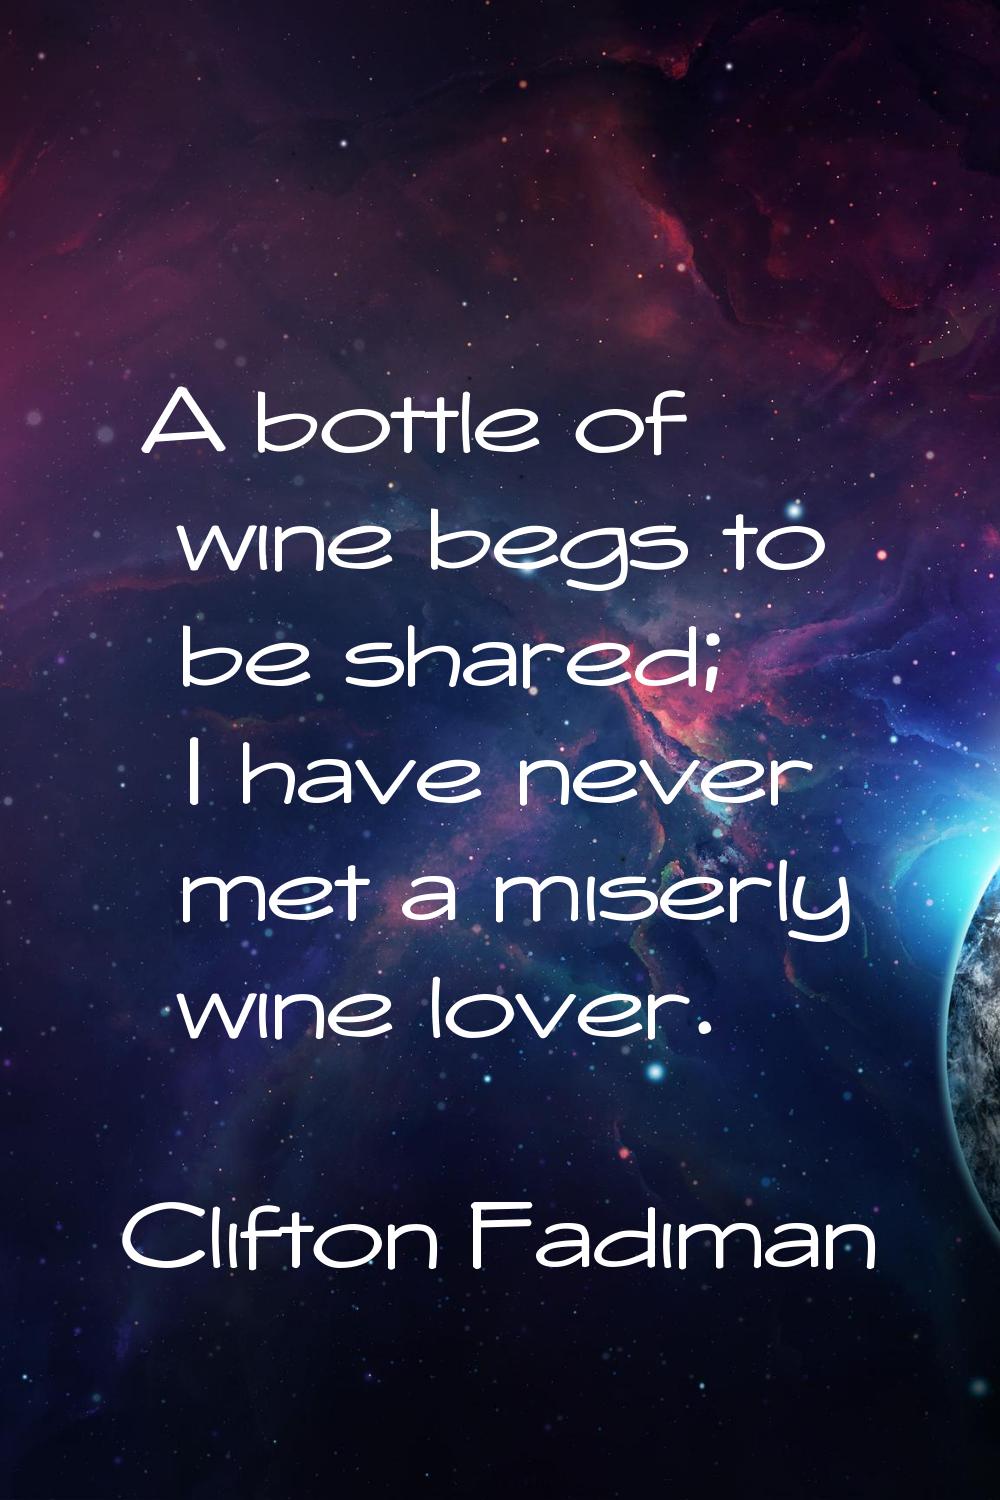 A bottle of wine begs to be shared; I have never met a miserly wine lover.